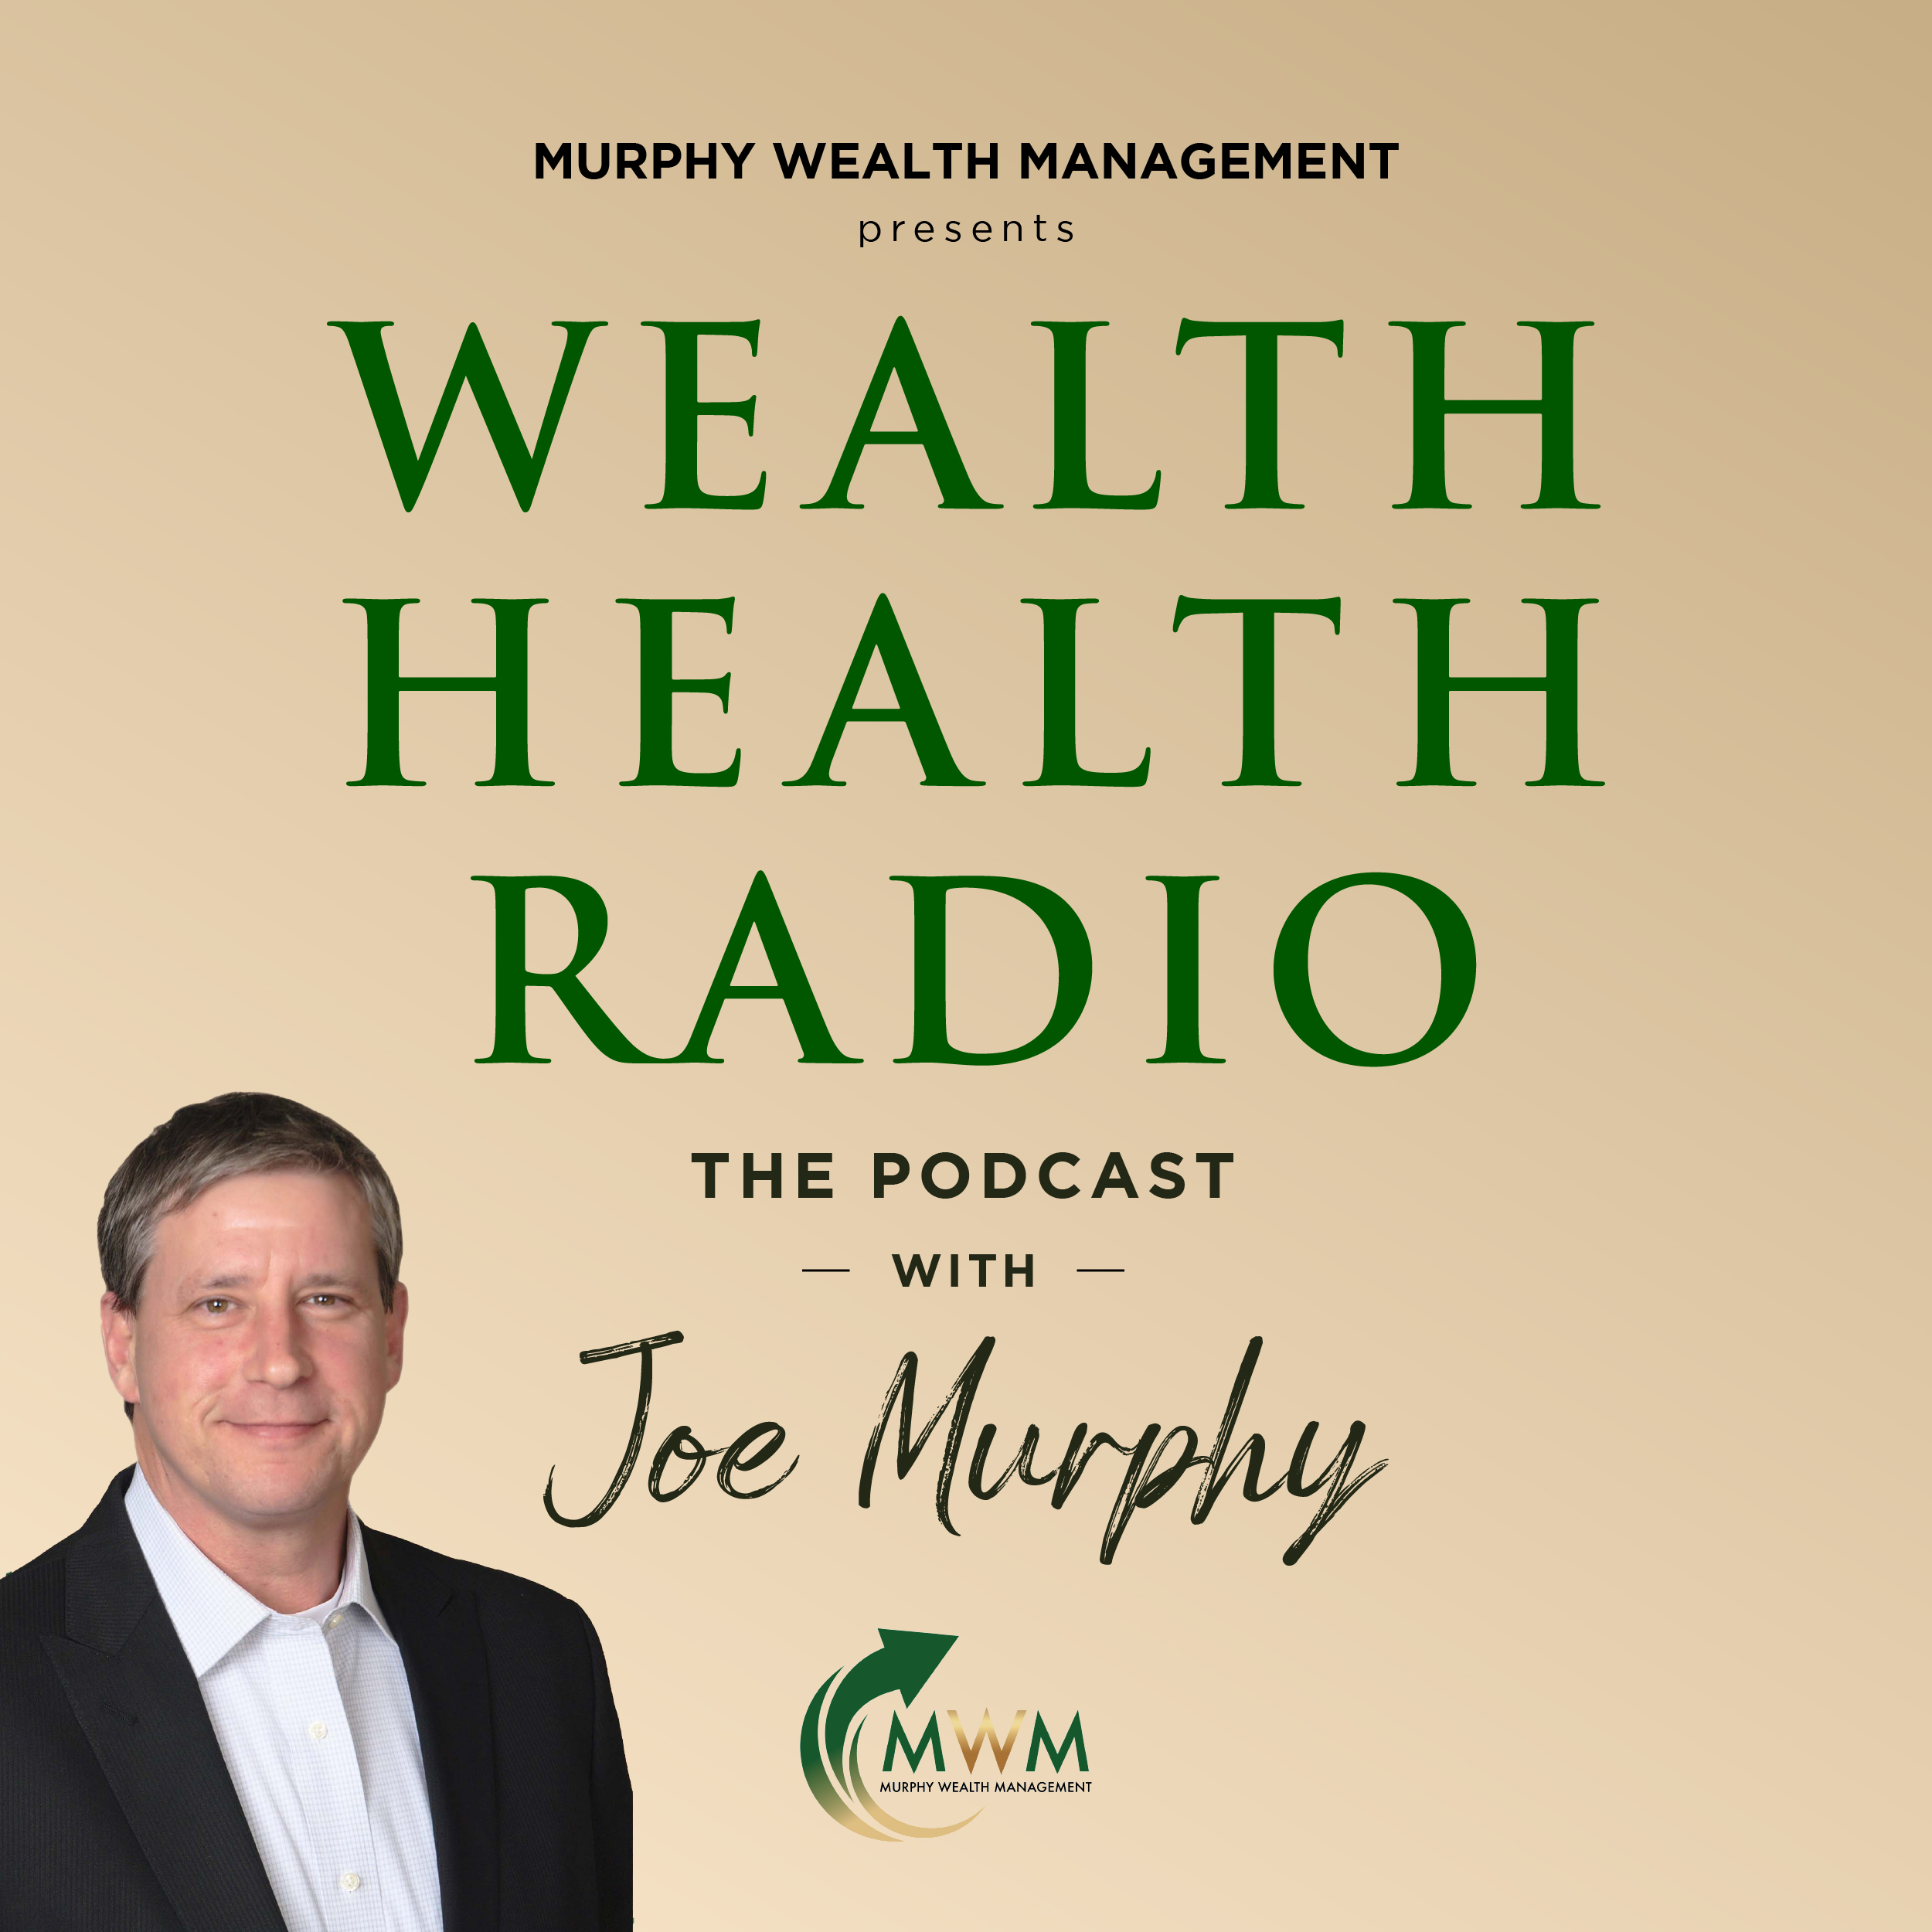 Ep 40 Wealth Health Radio Getting to retirement is full of twists and turns. The question is will you be ready? Joe Murphy offers guidance to help you get there.